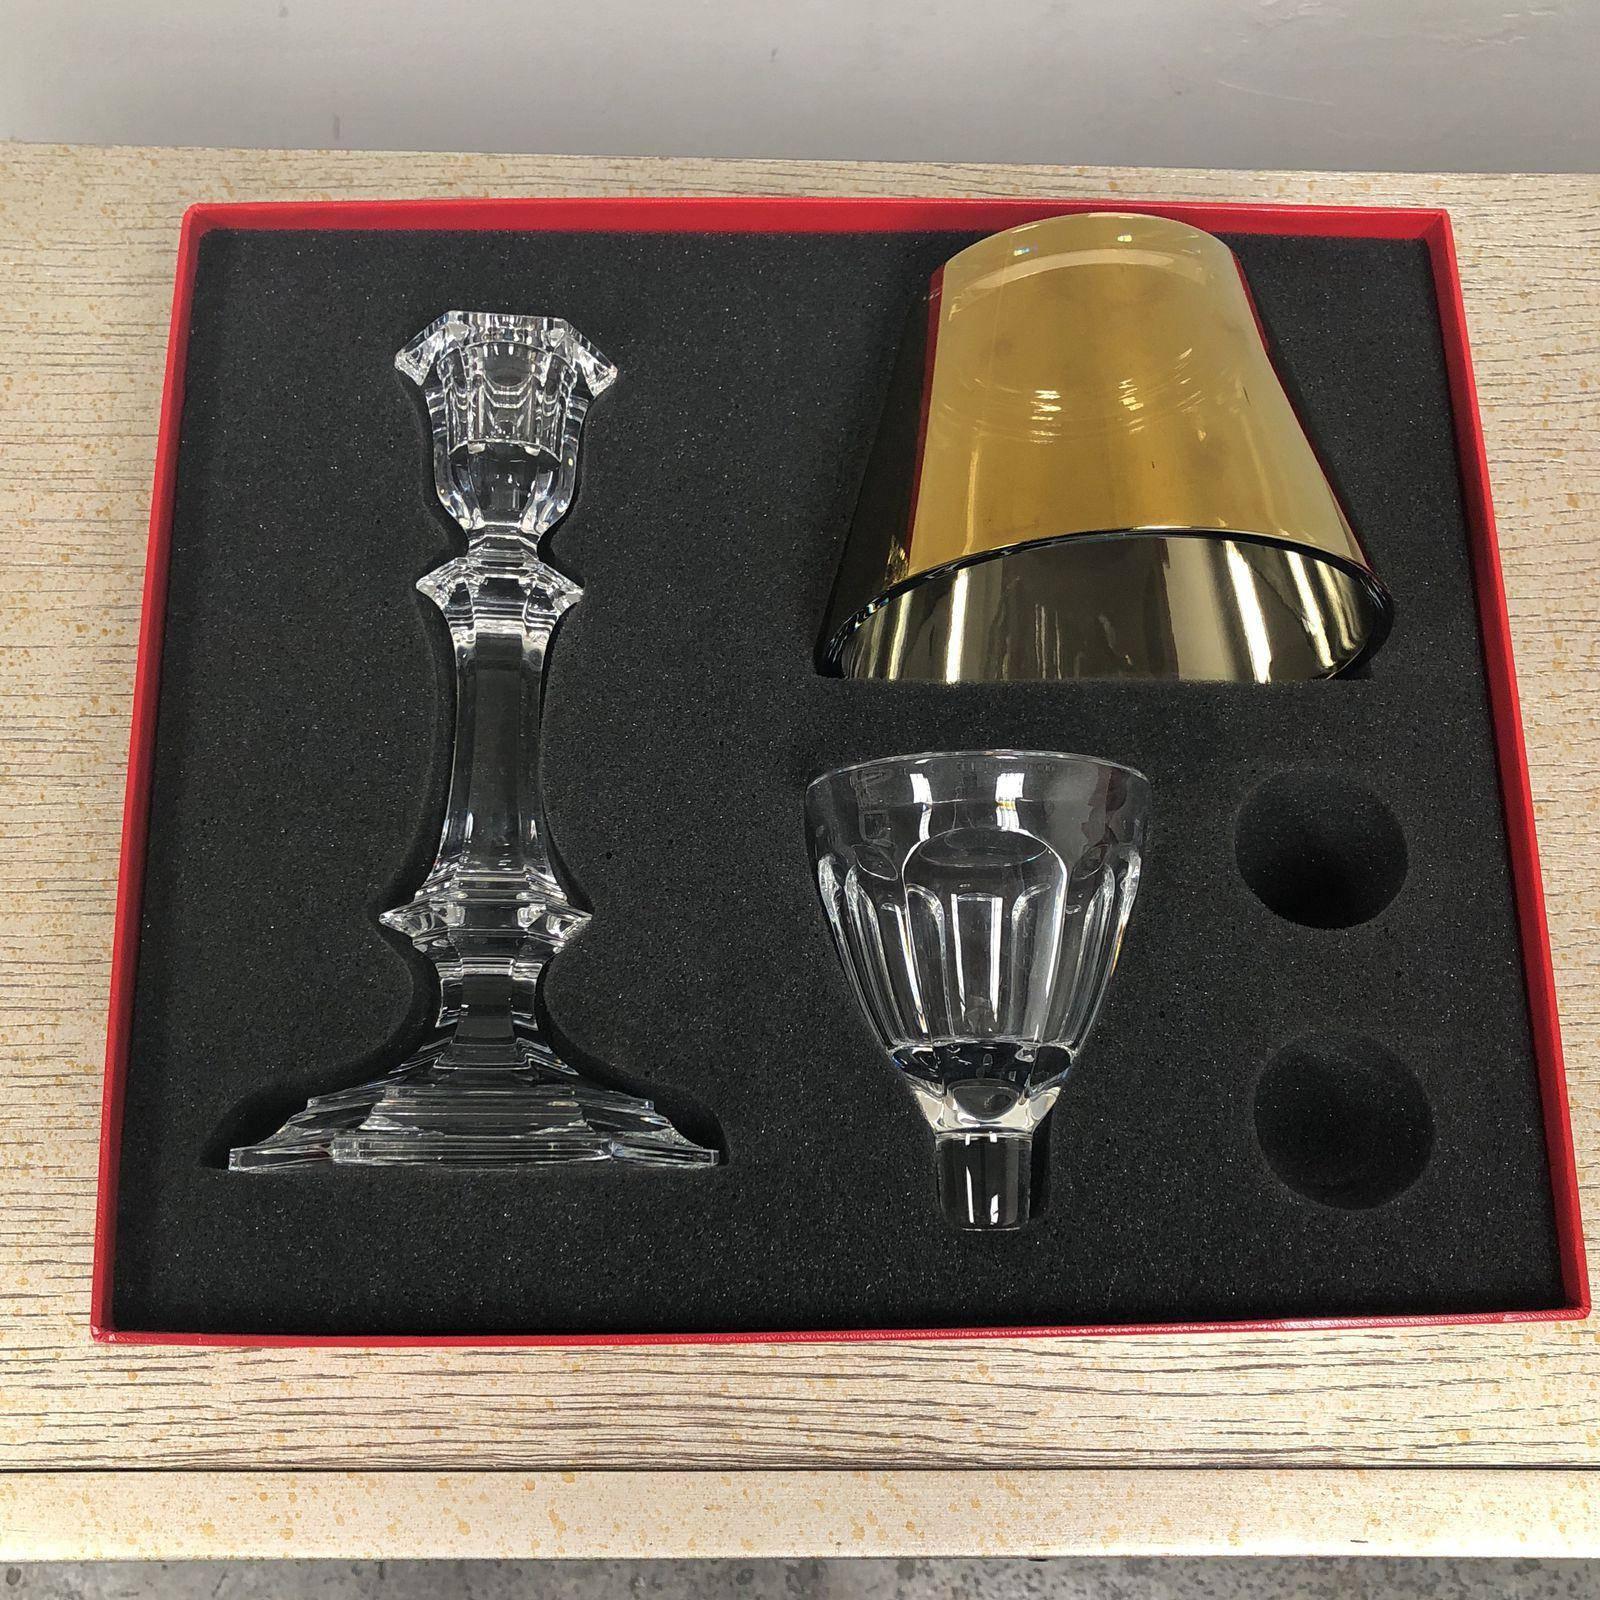 A Harcourt our fire baccarat crystal designed by Phillipe Starck.
A stunning piece to enrich your home, signed and numbered. This is part of the Darkside collection. A crystal base with a gold shade. Handmade in France.
    